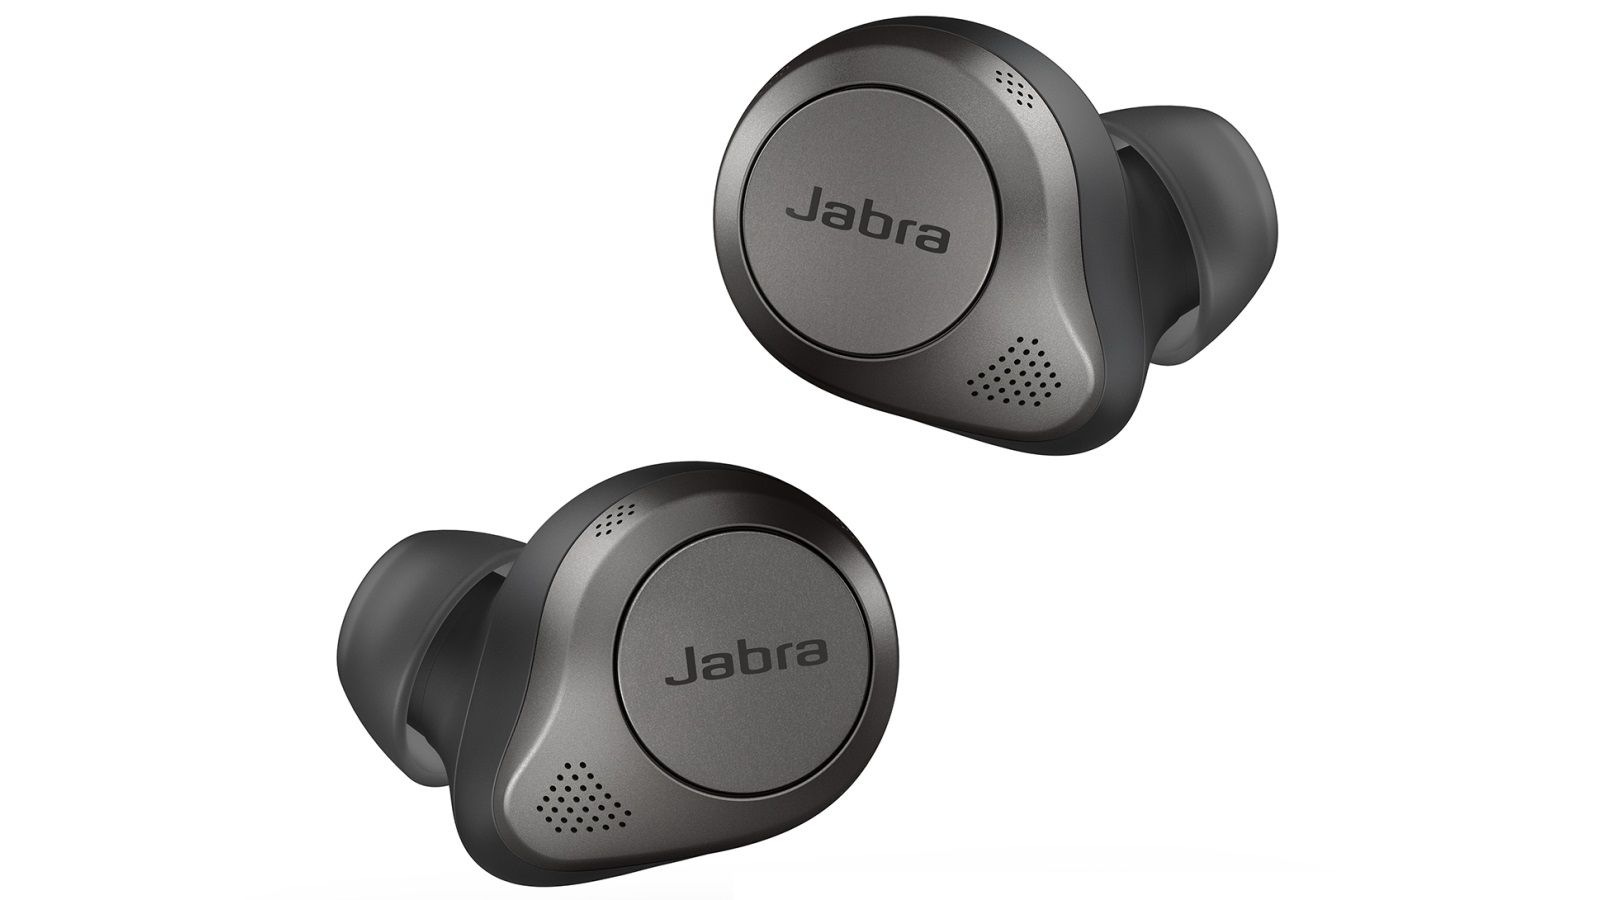 Jabra Durable Silicone Protective Cover Earphone Case for-Jabra Elite 85t Earbuds 